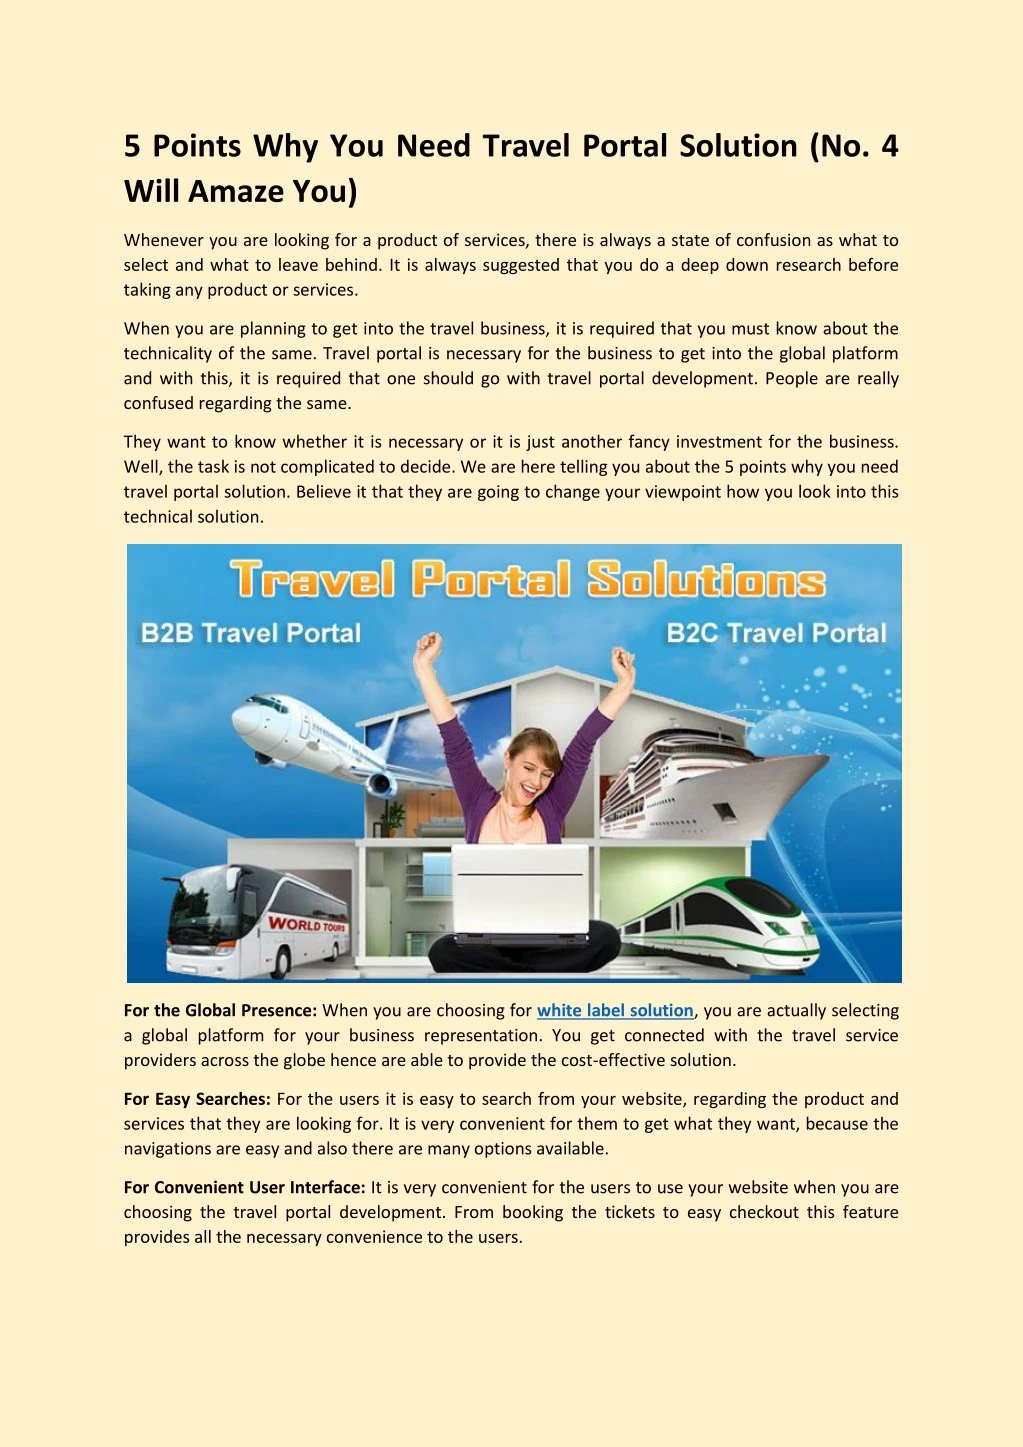 5 points why you need travel portal solution